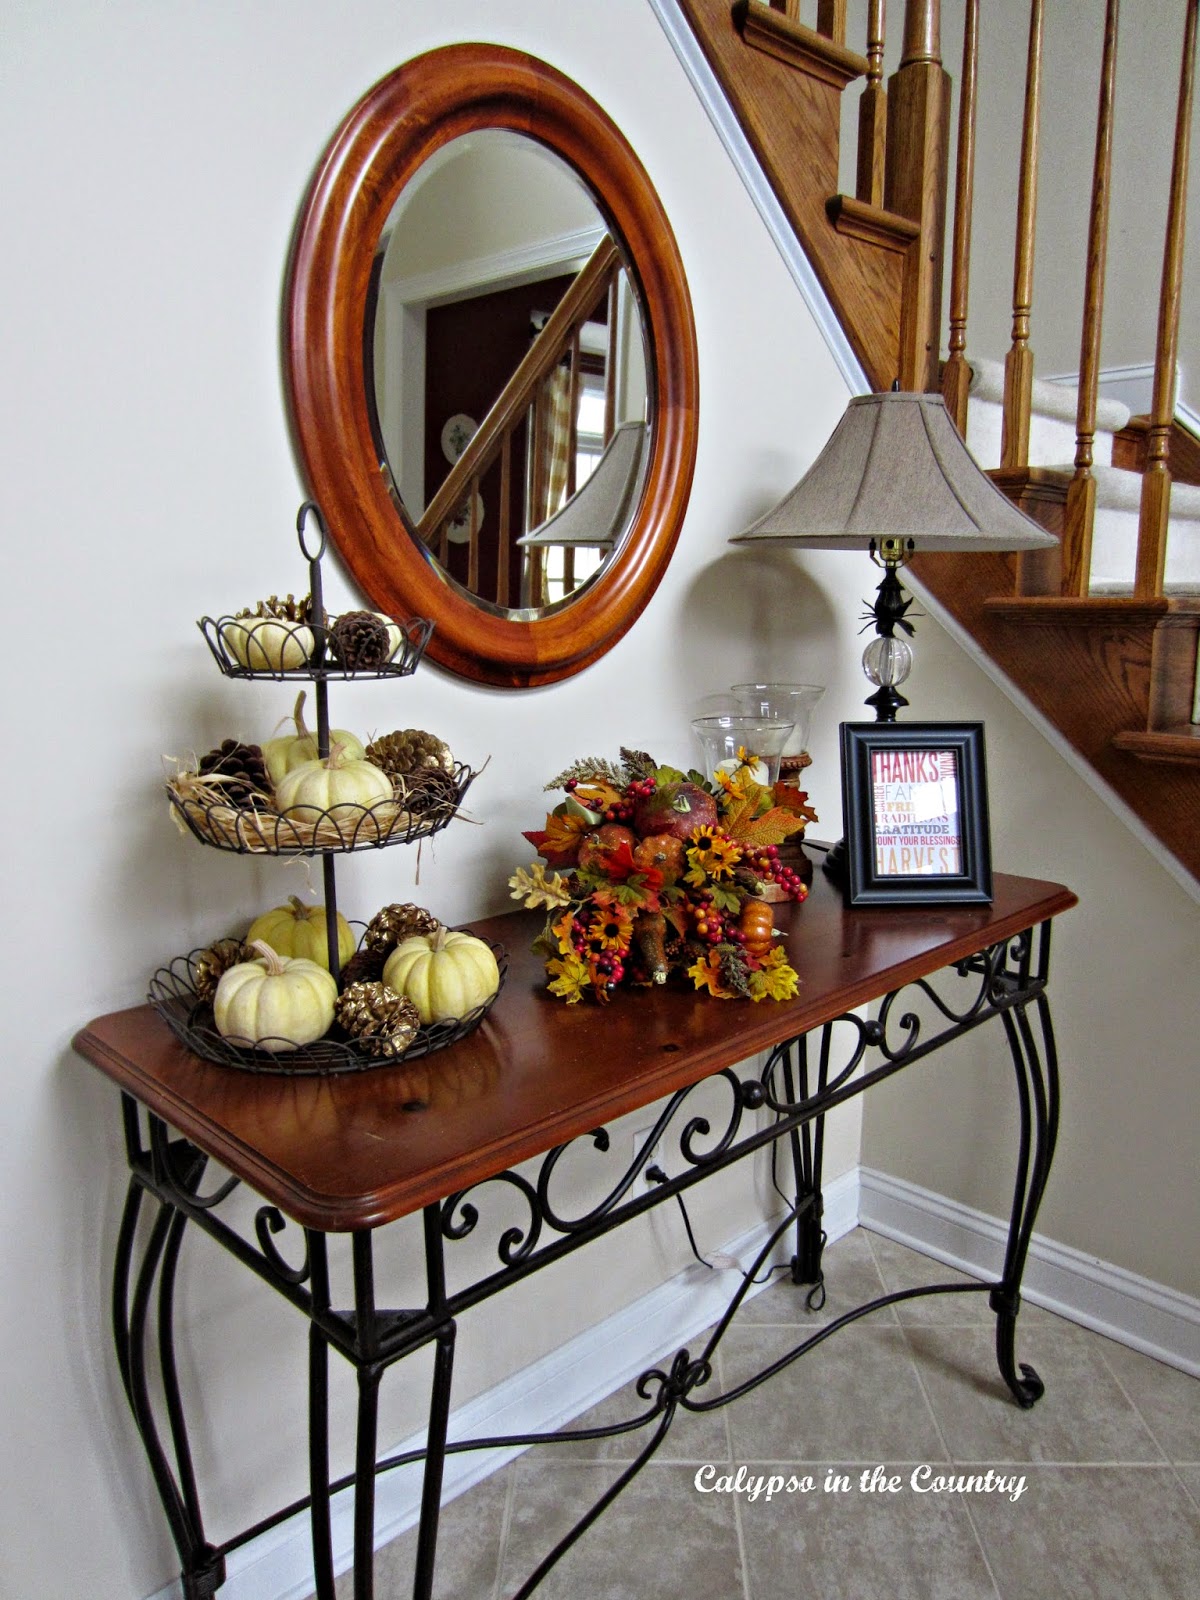 Easy Thanksgiving Vignettes You Can Do in Minutes - Calypso in the Country